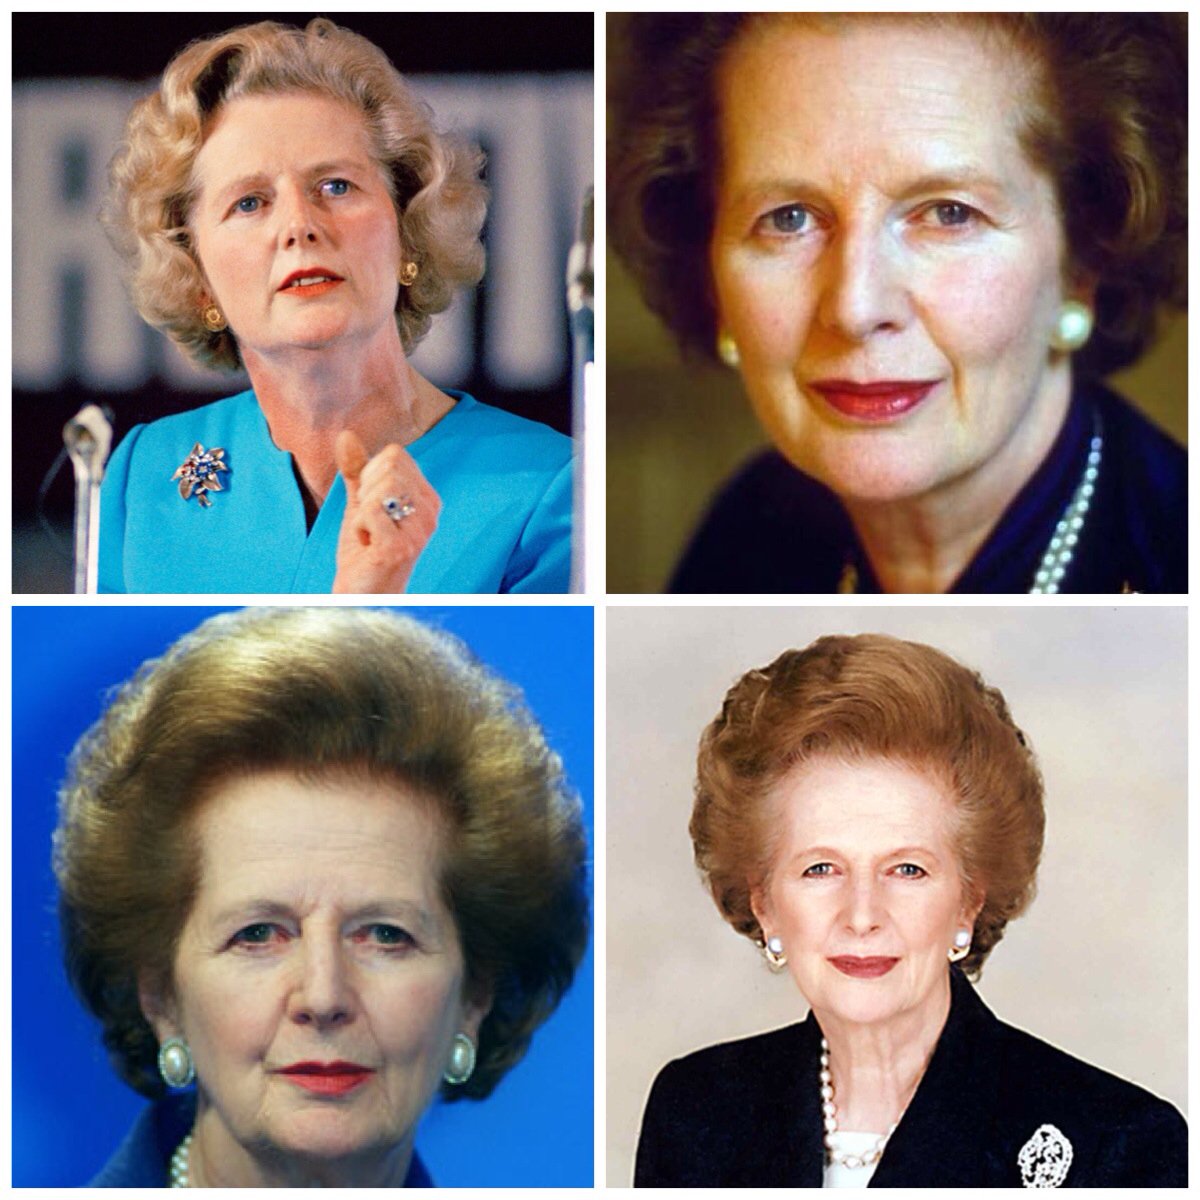 🇬🇧 The Great Margaret Thatcher A fantastic, patriotic, visionary & transformational Conservative Prime Minister 🇬🇧